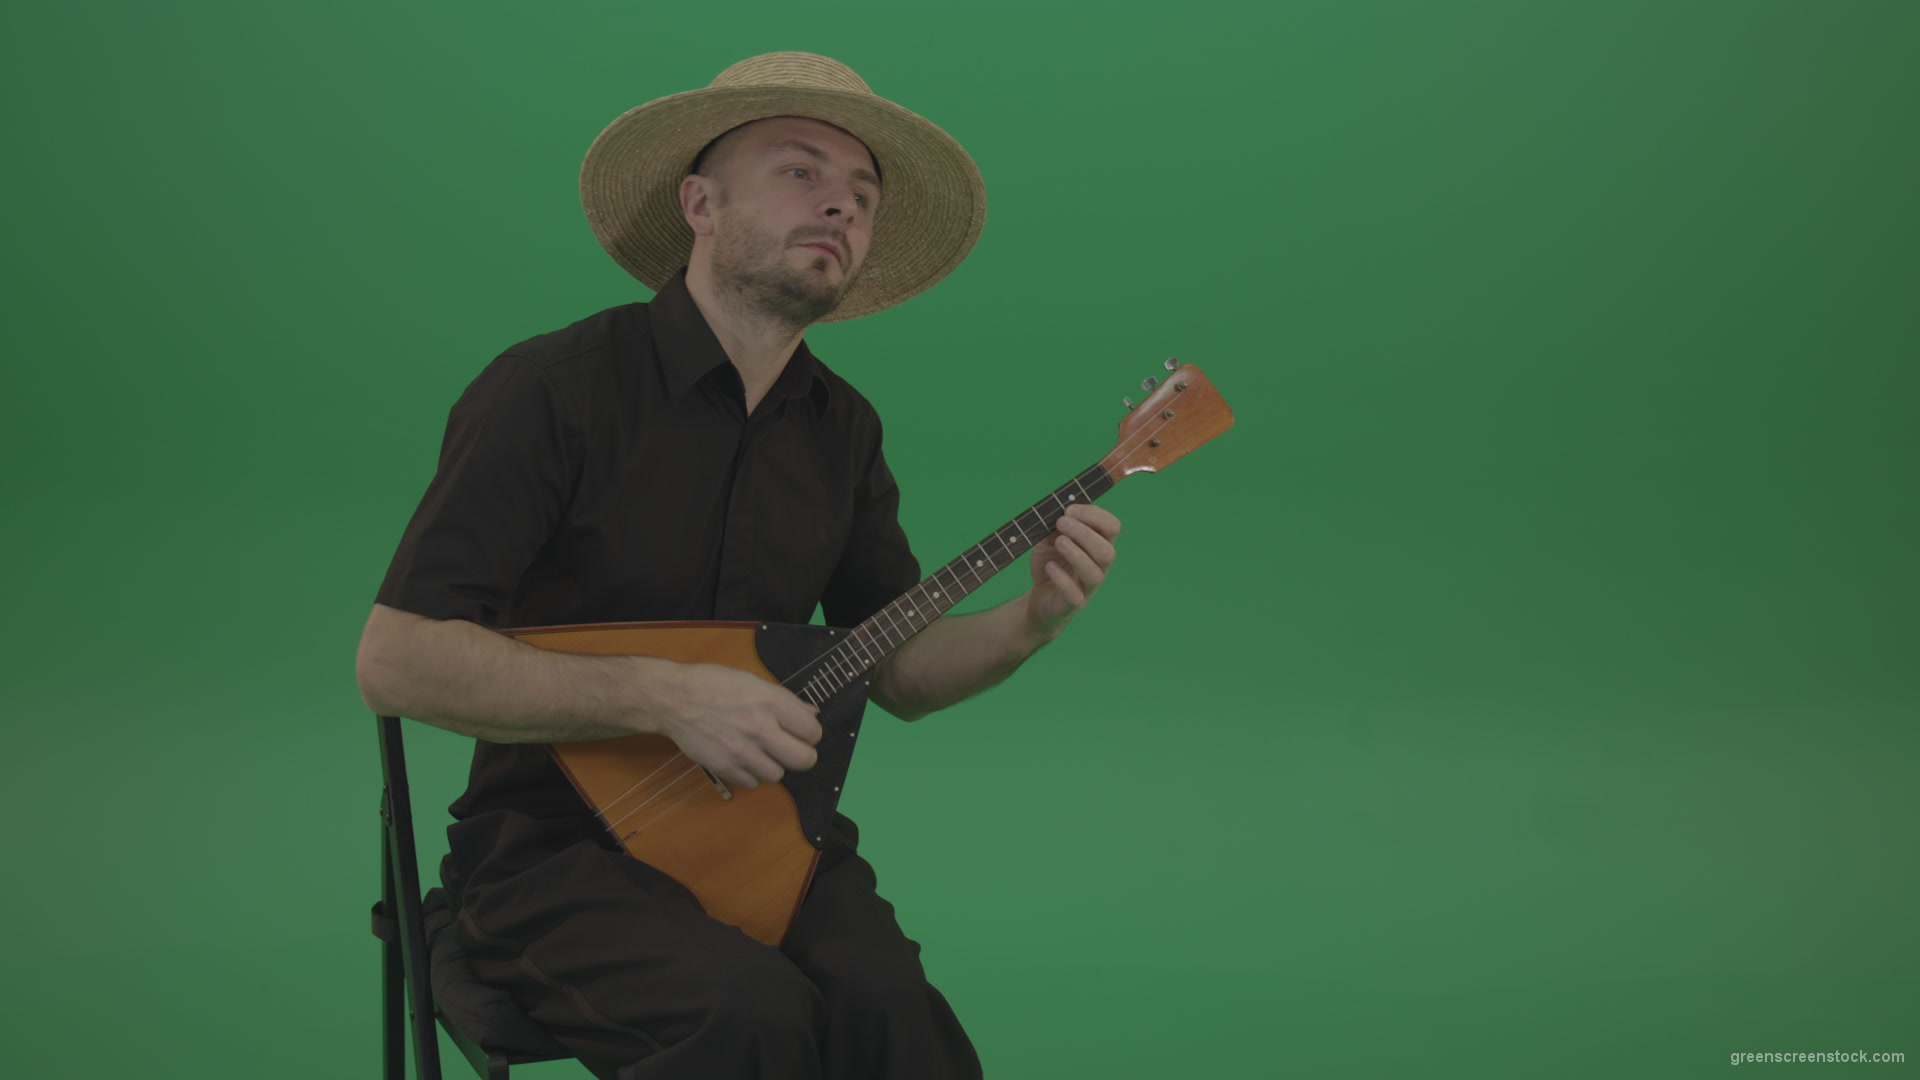 Man-from-village-play-Balalaika-music-instrument-isolated-on-green-screen_009 Green Screen Stock